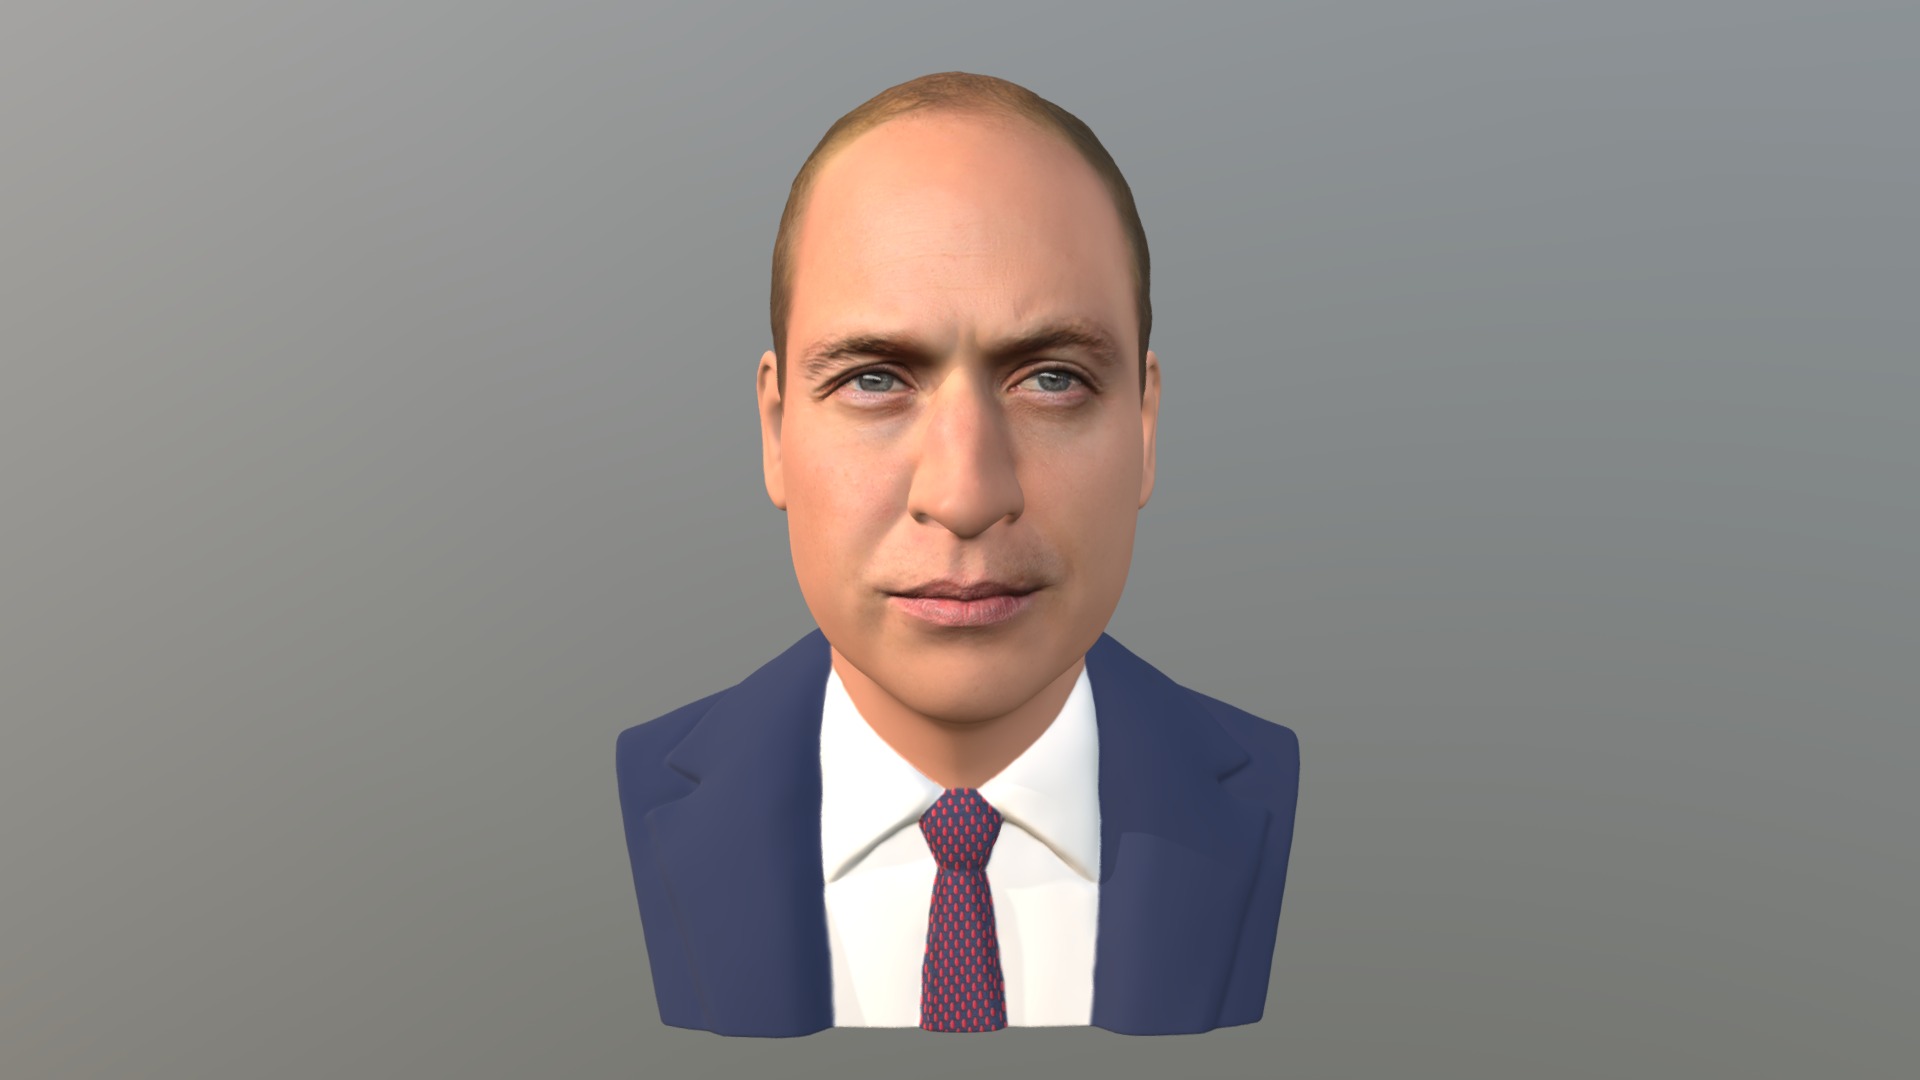 3D model Prince William bust for full color 3D printing - This is a 3D model of the Prince William bust for full color 3D printing. The 3D model is about a man in a suit.